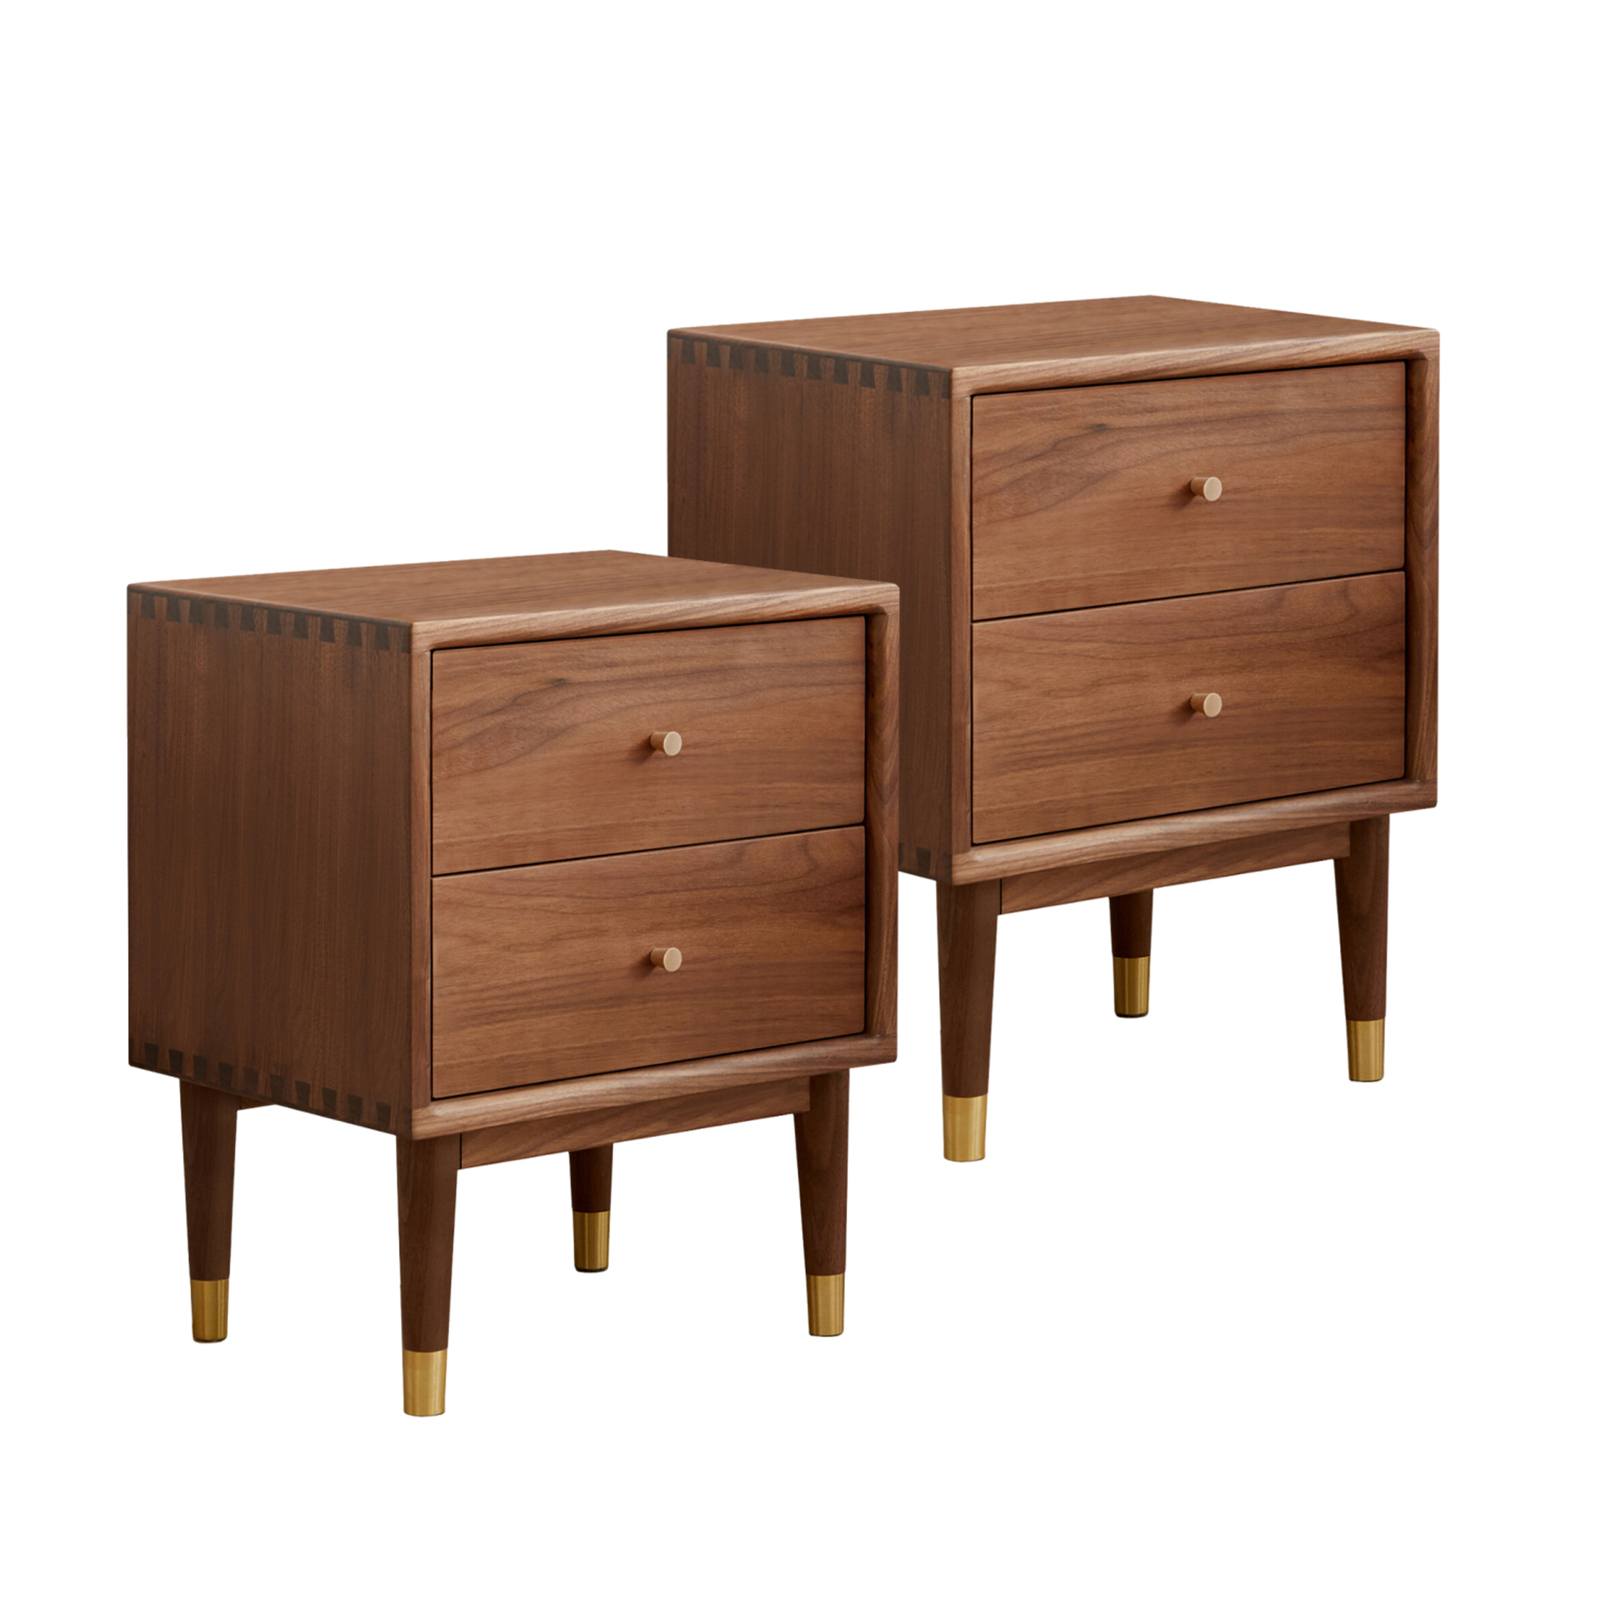 MIUZ 2x Solid Walnut Timber Bedside Tables Drawers Side Table Nightstand Storage Cabinet Wood